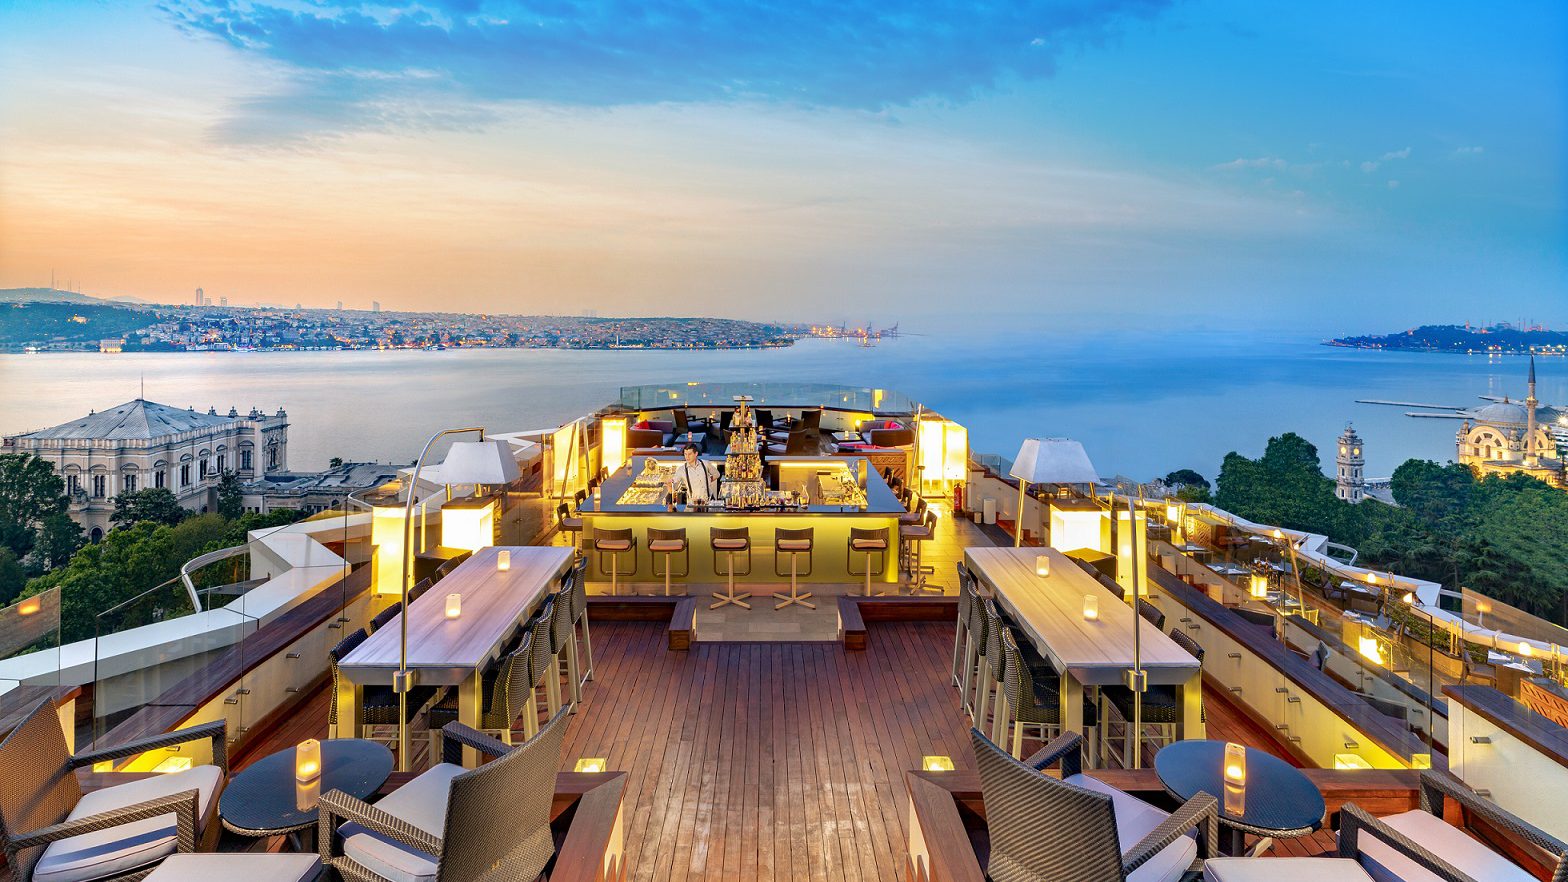 About the Swissotel The Bosphorus Hotel